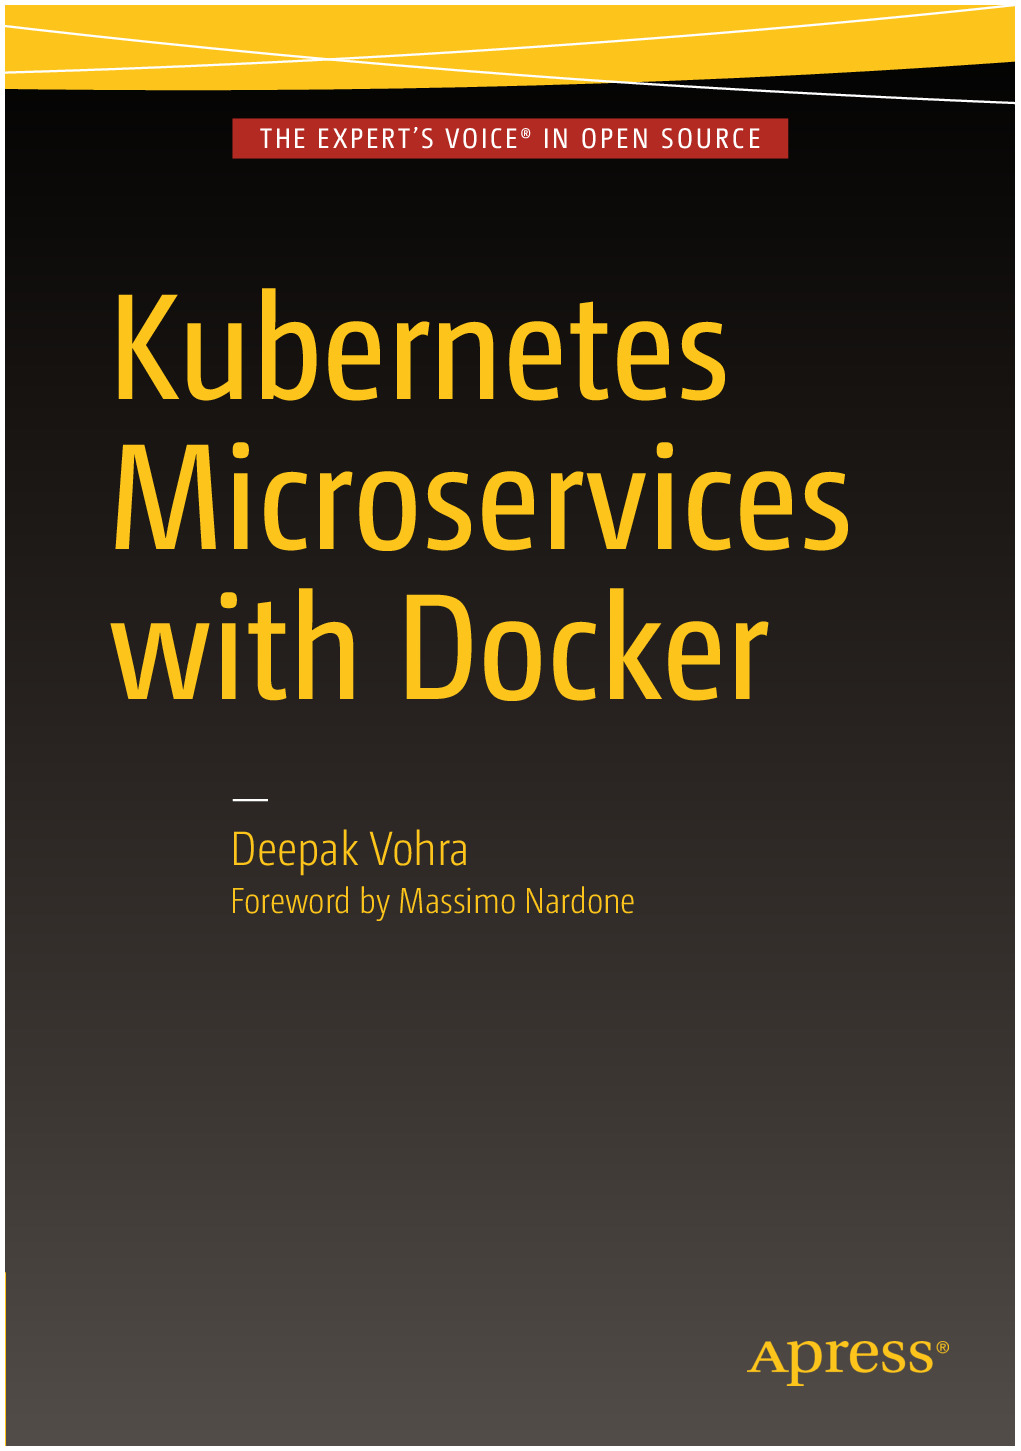 Kubernetes-Microservices with Docker